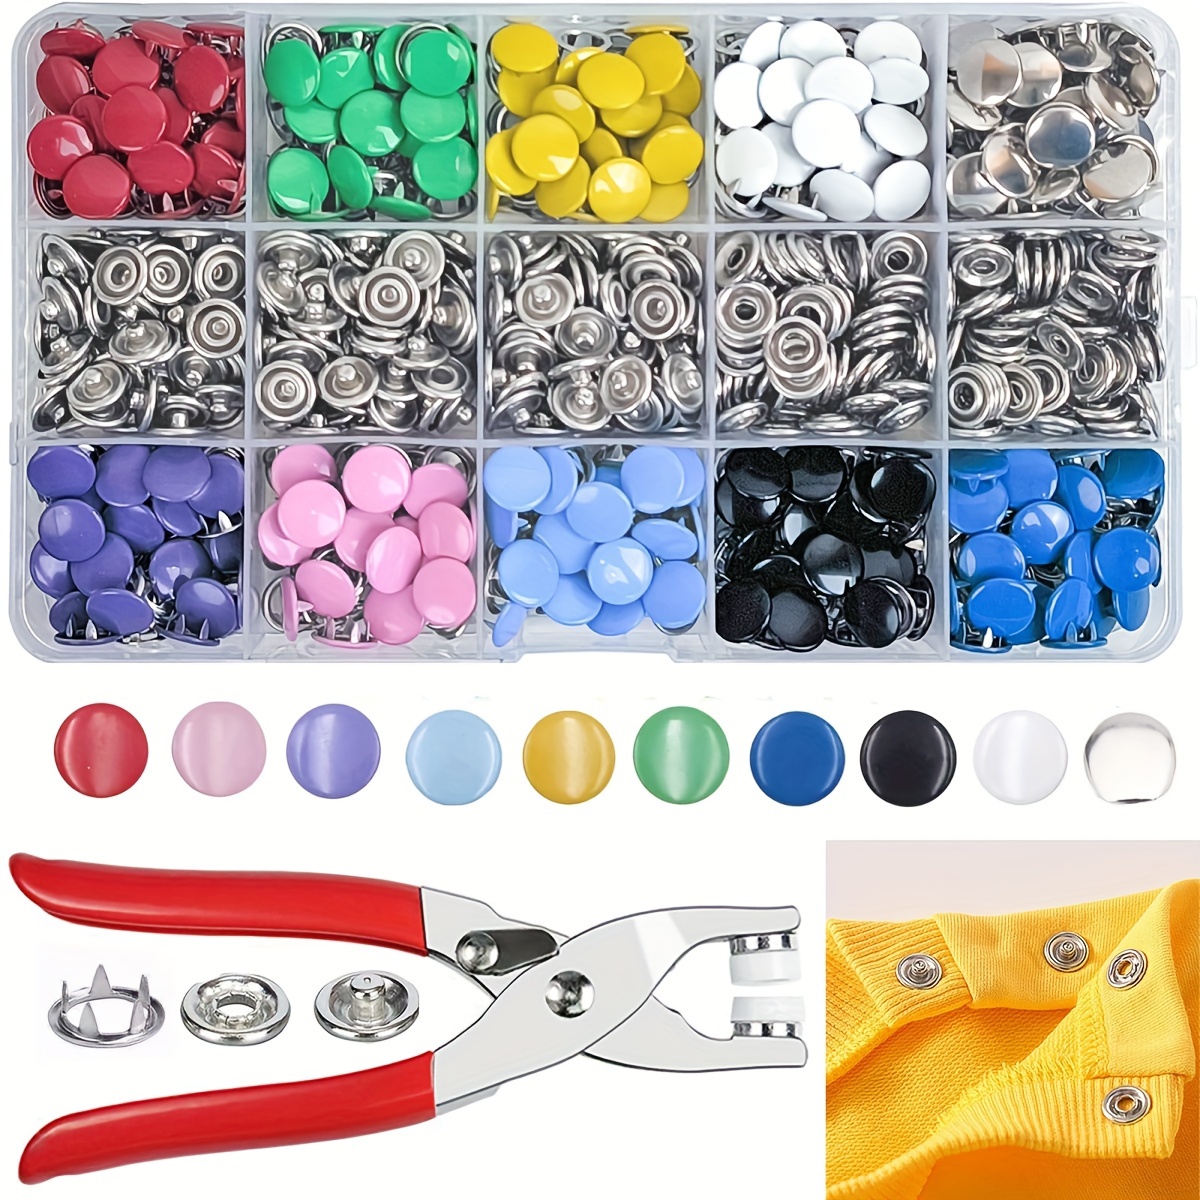 

800pcs Metal Snaps Buttons With Fastener Pliers Press Tool Kit, No-sew Button Fasteners For Clothes Backpacks, Diy Sewing Tools